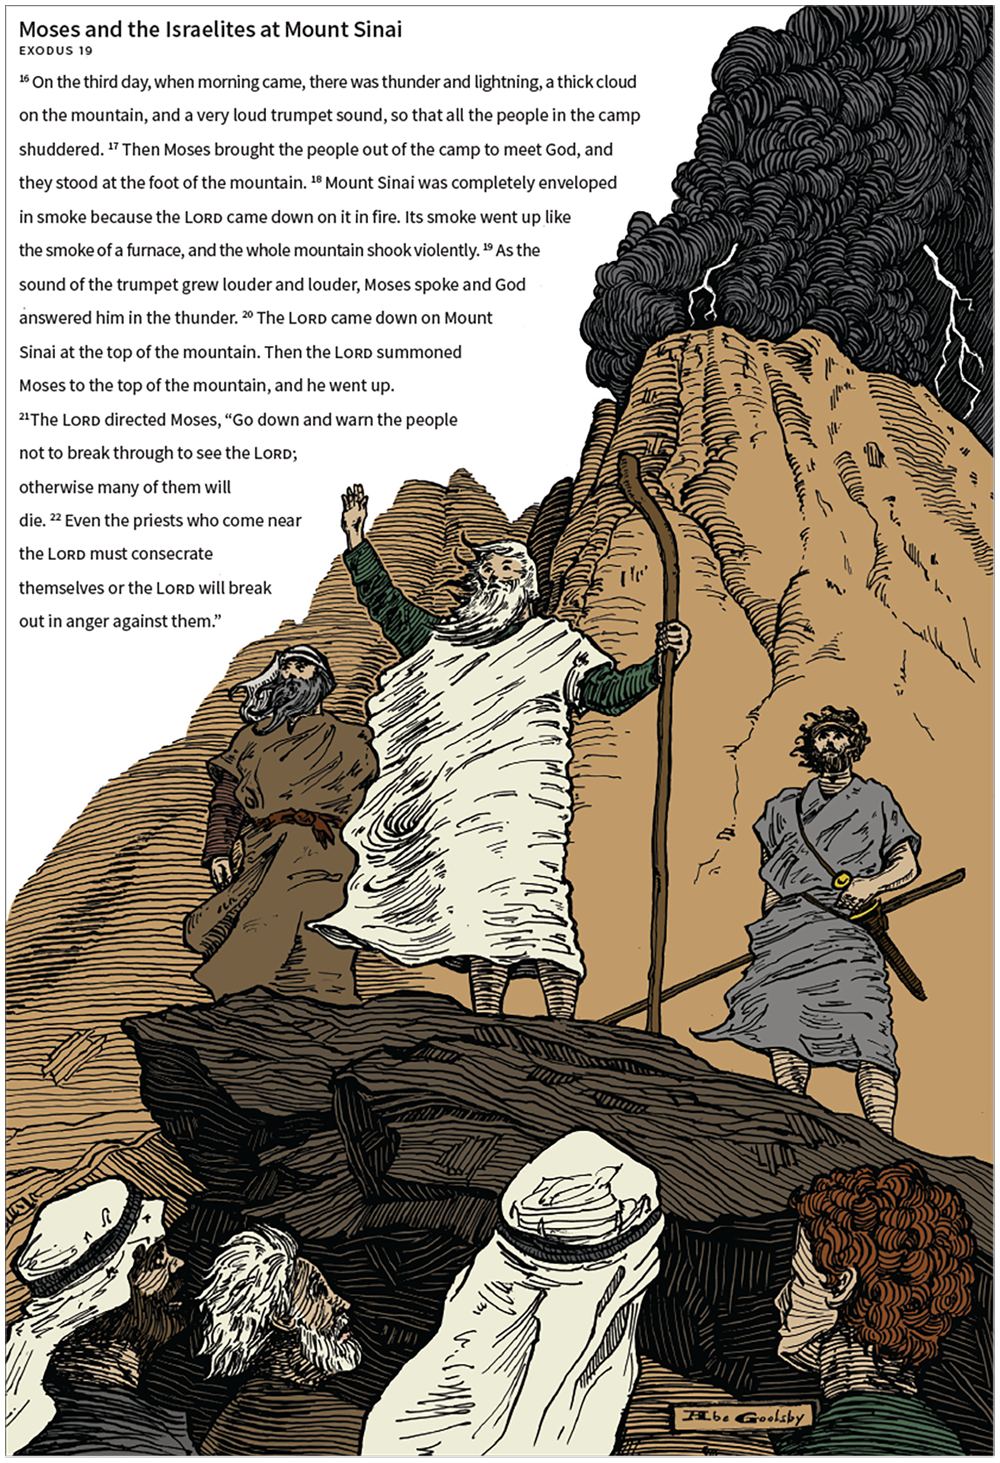 Moses and the Israelites at Mount Sinai